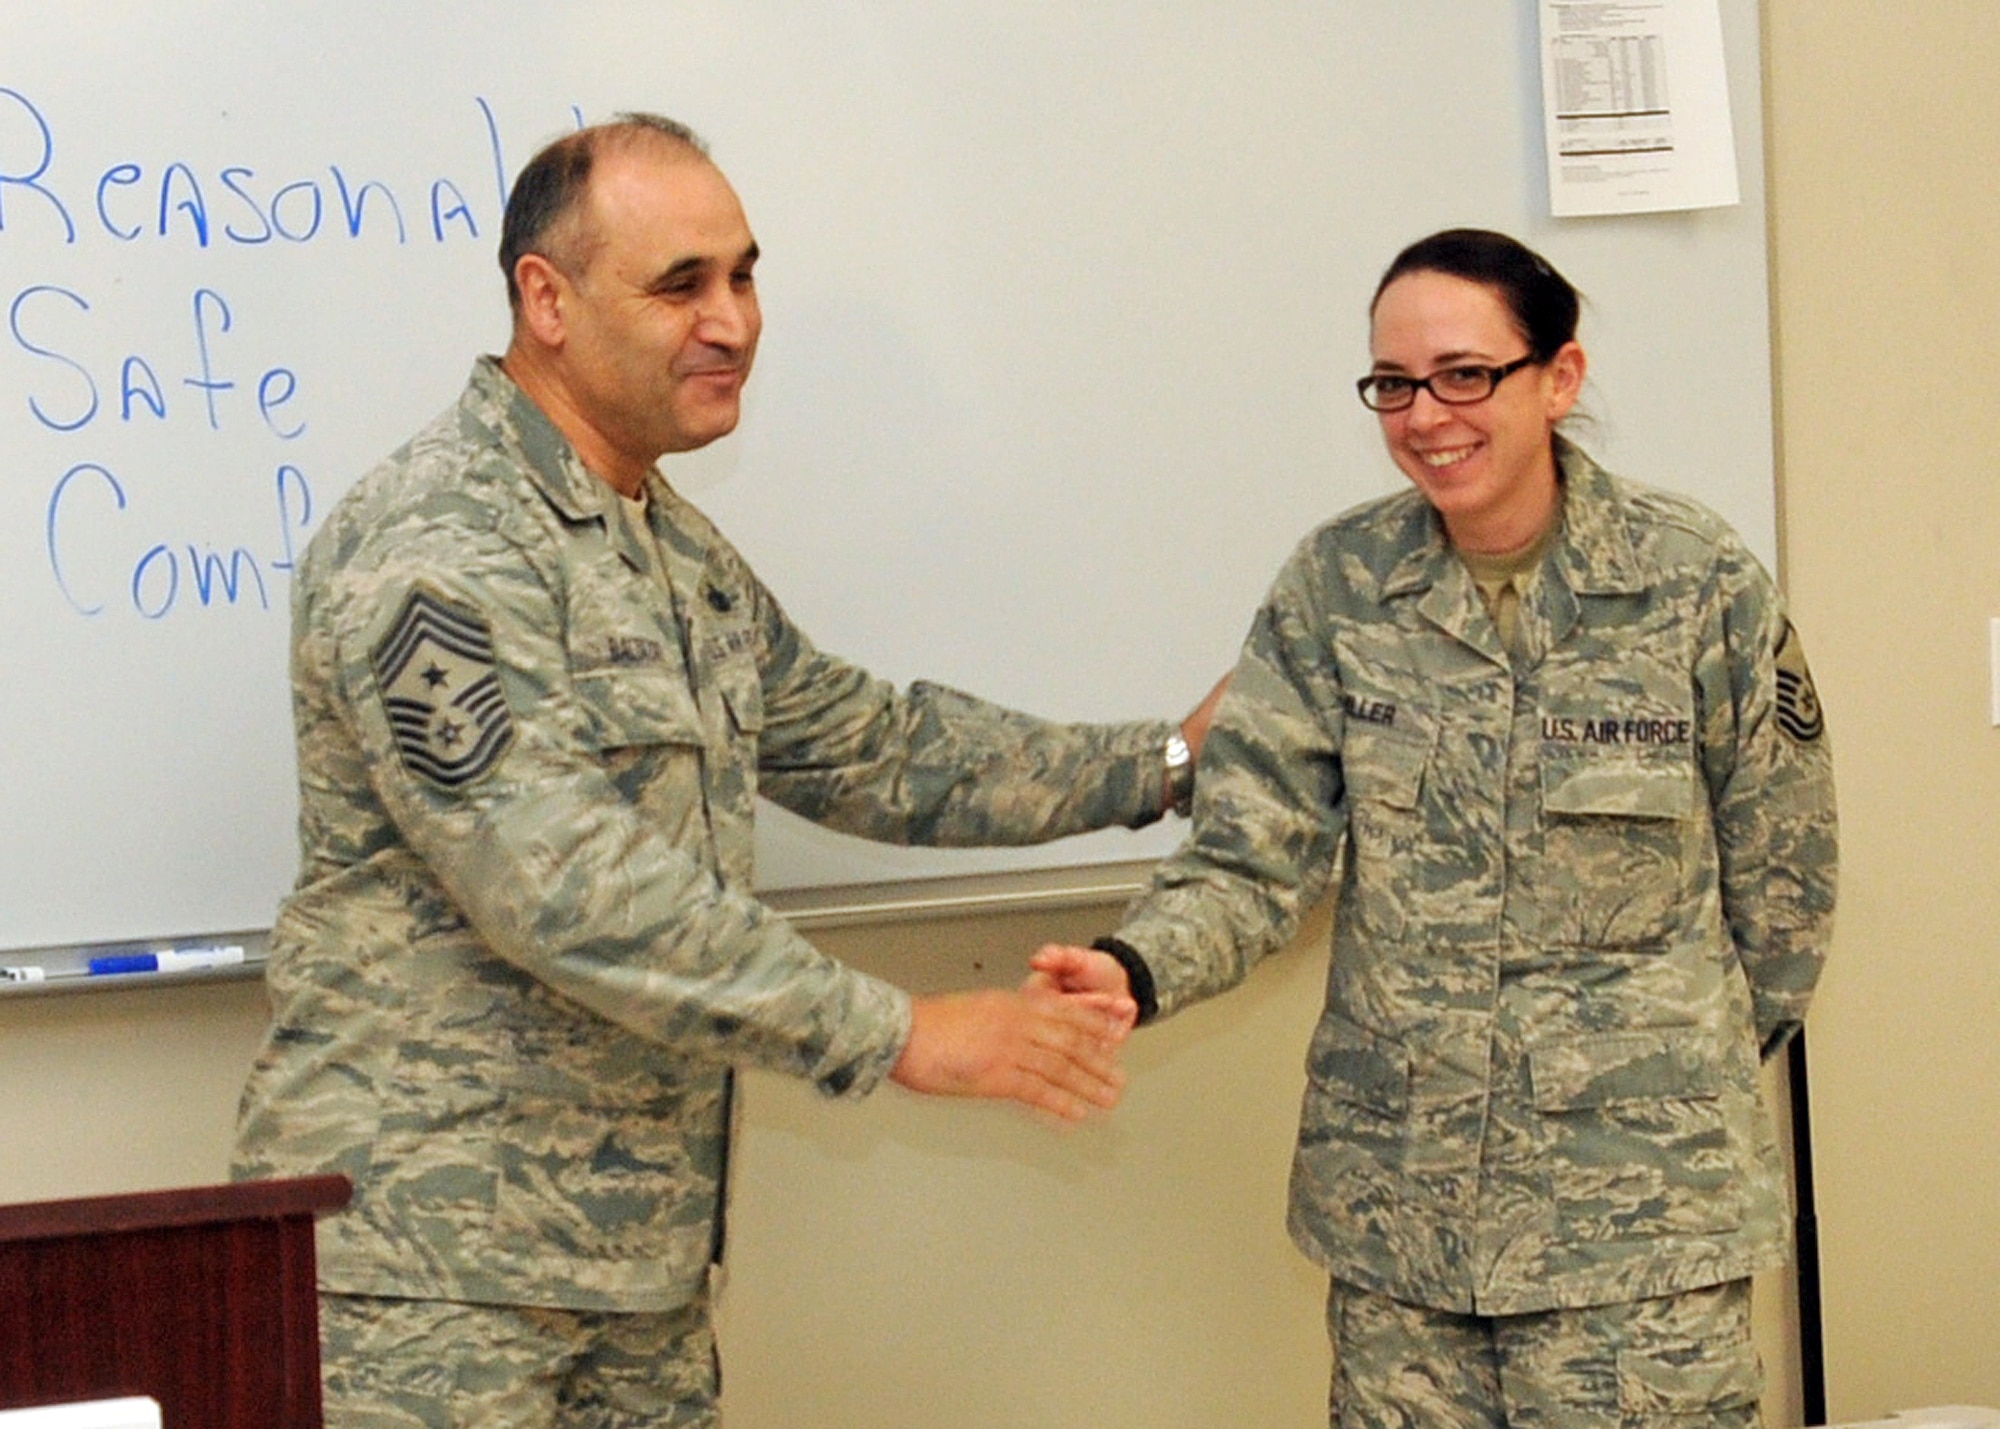 Command Chief Master Sergeant Jose Baltazar, Command Chief, 143d Airlift Wing, Rhode Island Air National Guard, presents Master Sergeant Janeen Miller, Public Affairs Manager, 143d AW, with a challenge coin for her role in preparing for, executing and instructing at the inaugural Leadership Development Course held at Quonset Air National Guard Base, North Kingstown, Rhode Island on January 21, 2015. National Guard Photo by Senior Master Sergeant Brian Robitaille